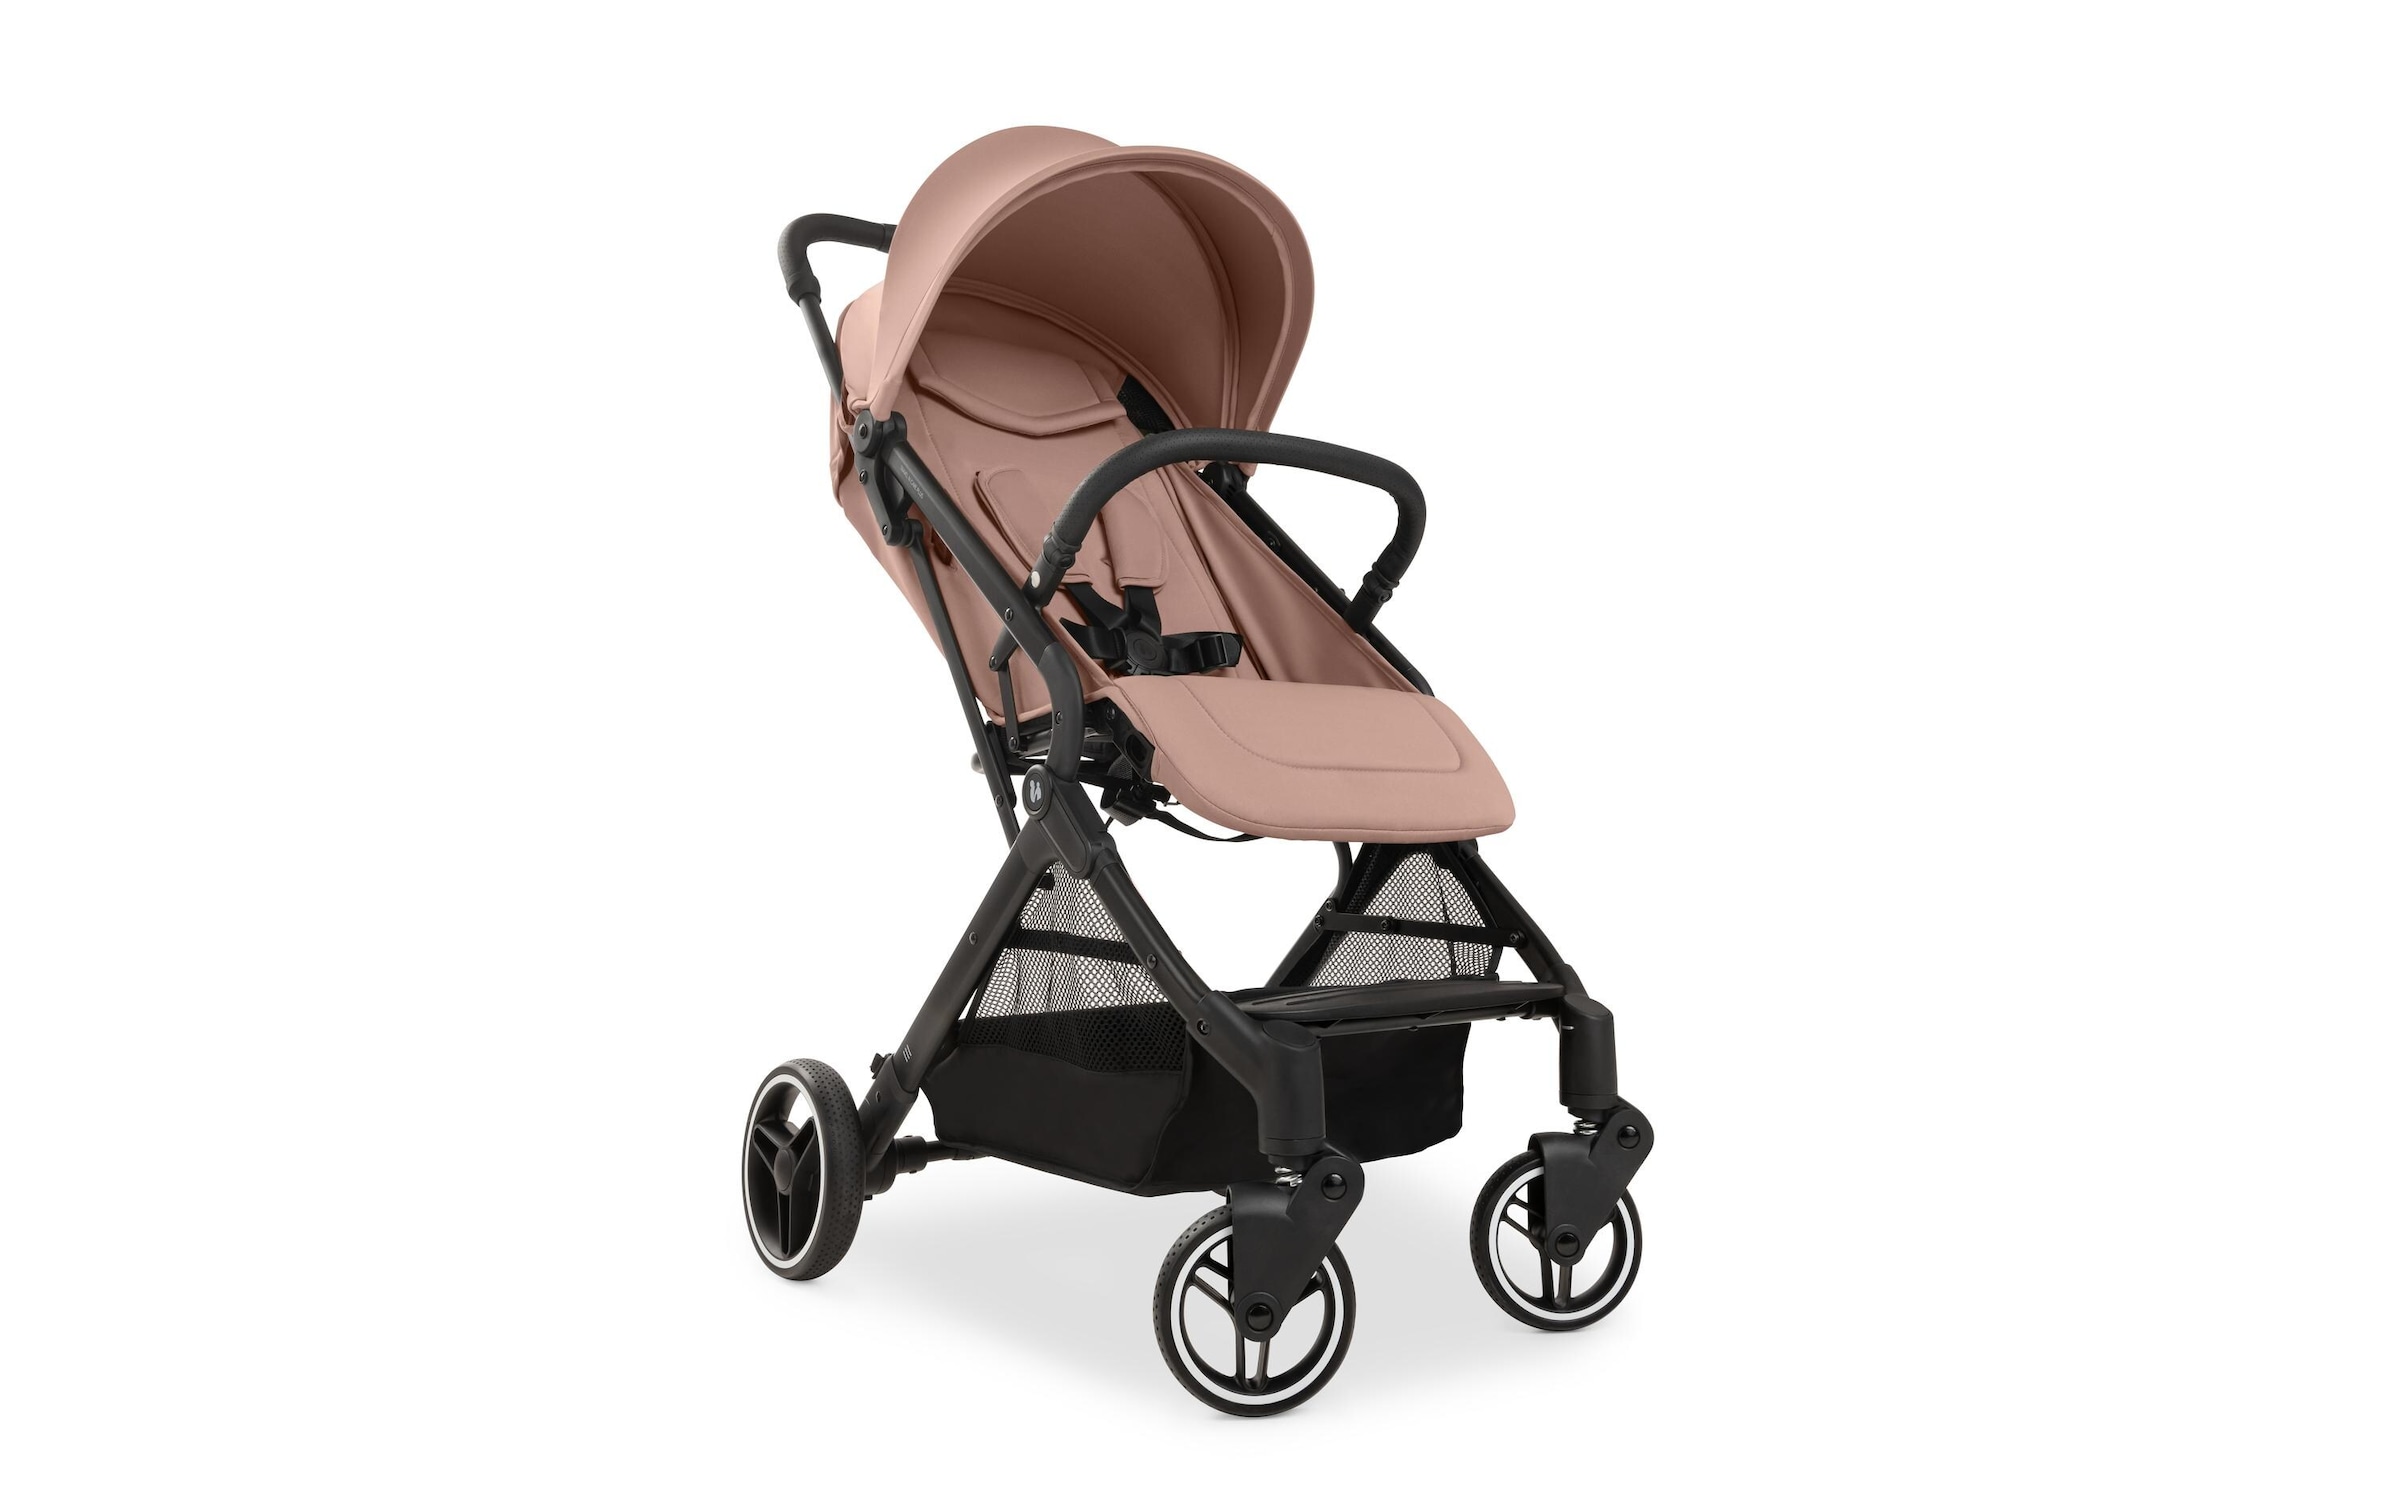 Hauck Kinder-Buggy »Travel N Care Plus Haselnuss Rosa«, 25 kg